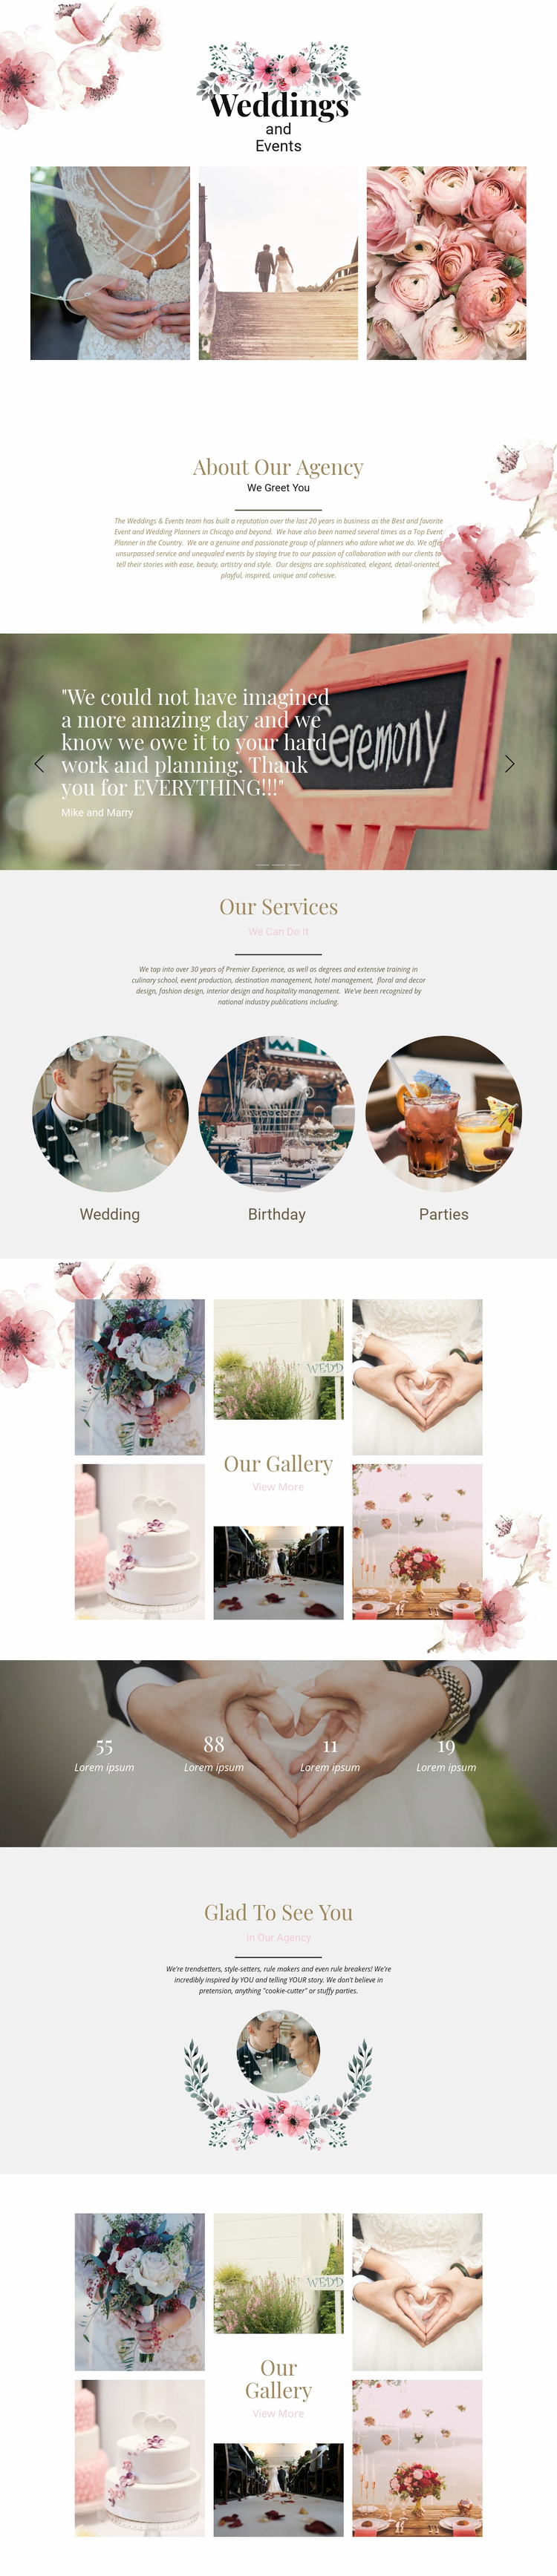 Moments of wedding Squarespace Template Alternative